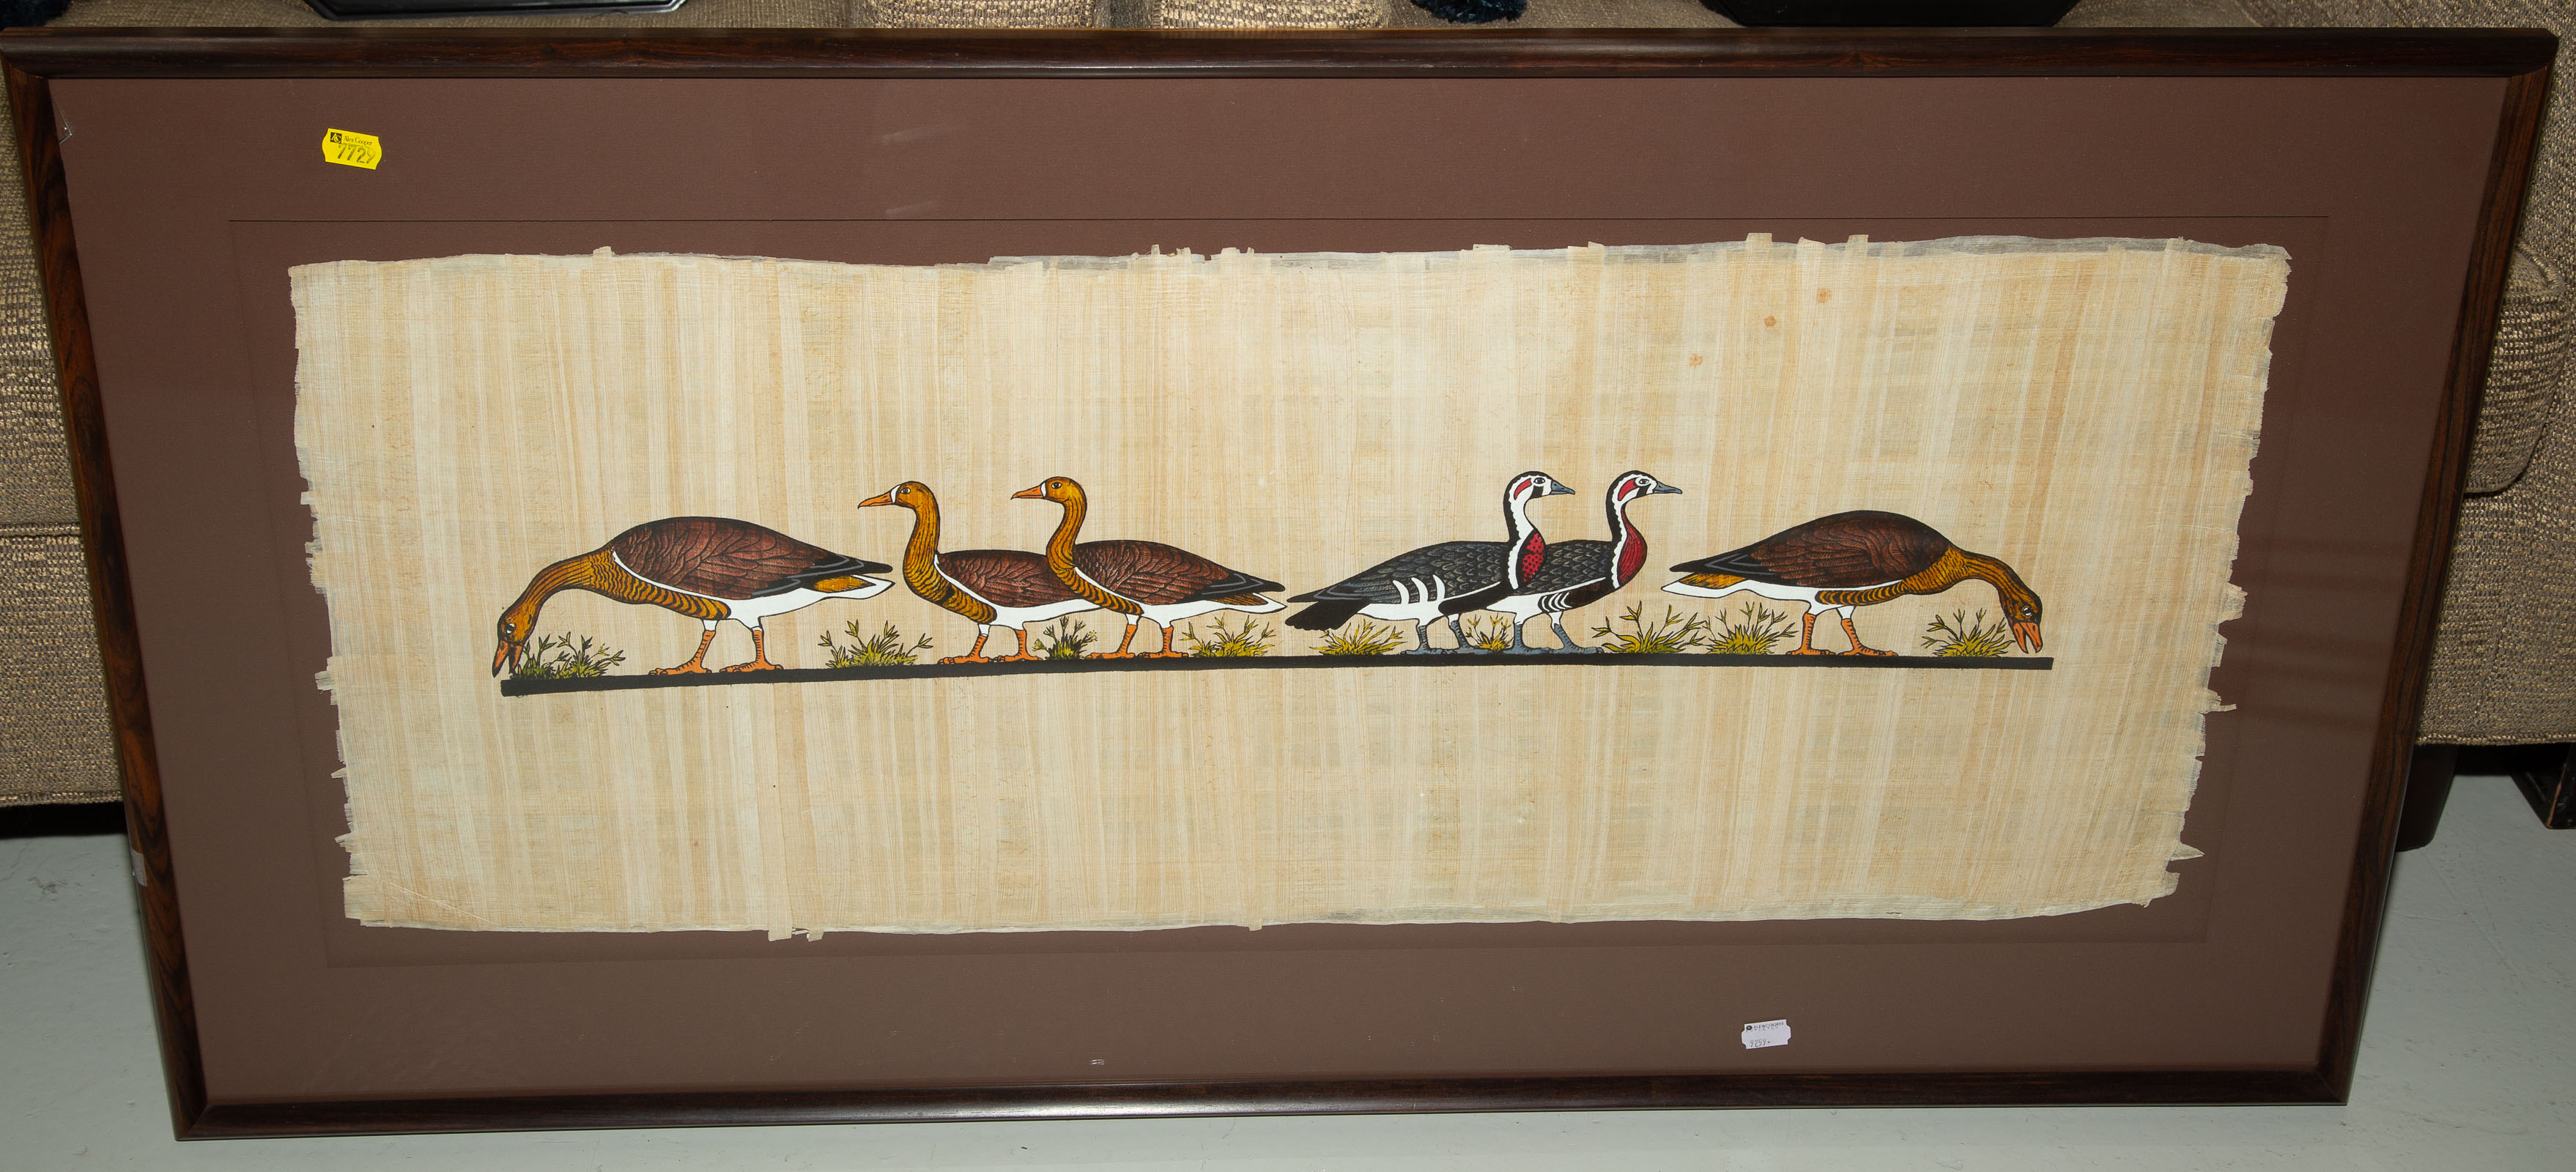 LARGE EGYPTIAN-STYLED ARTWORK WITH DUCKS